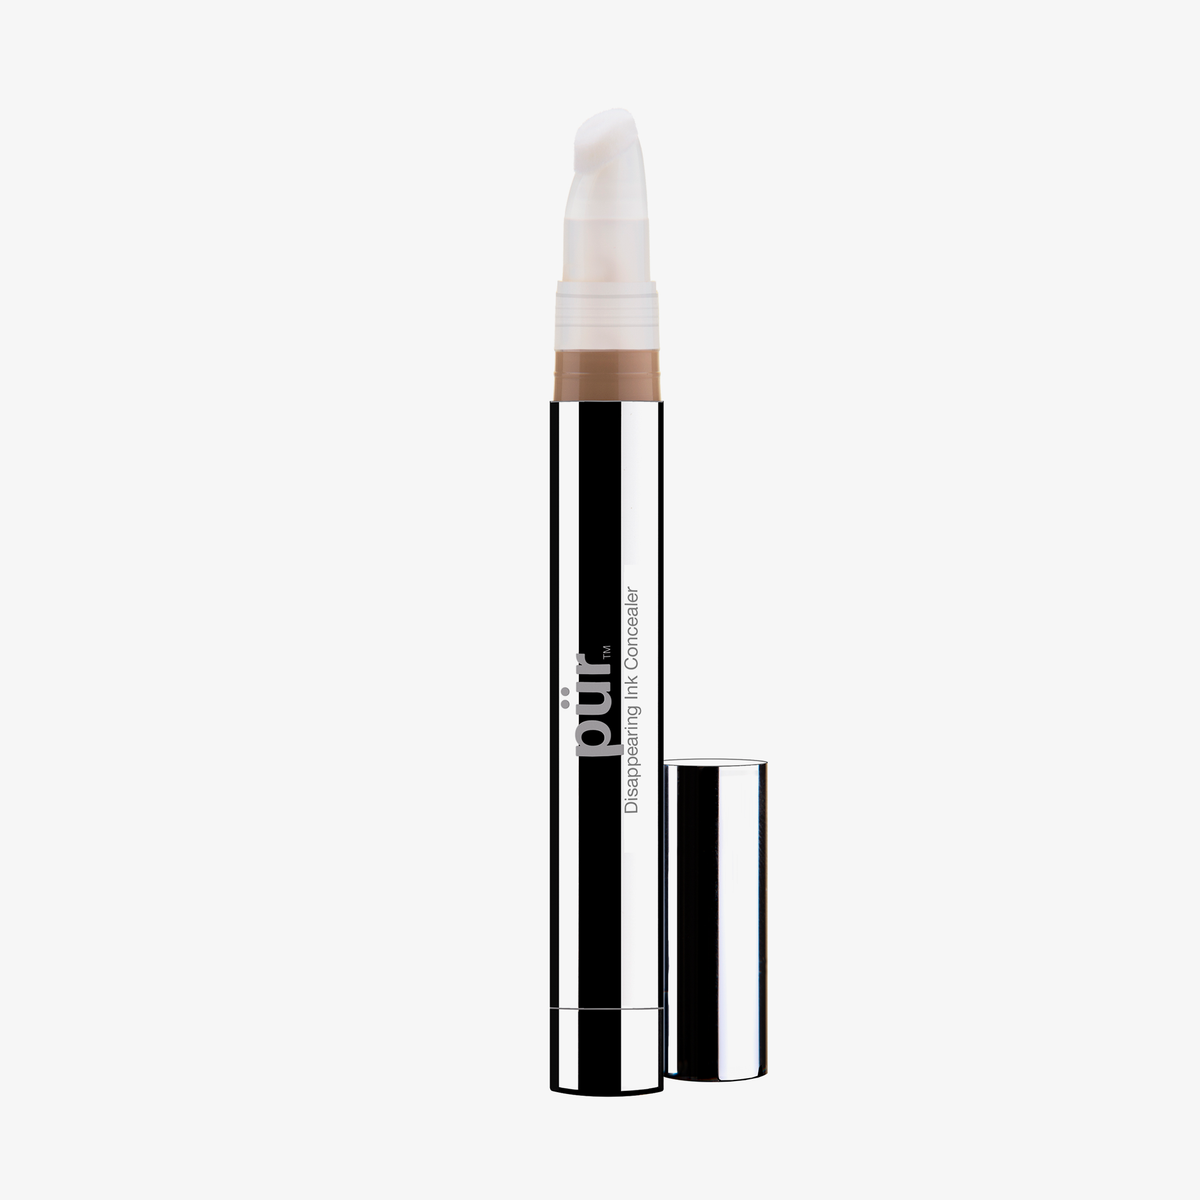 Pür Cosmetics | Disappearing Ink Concealer Tan